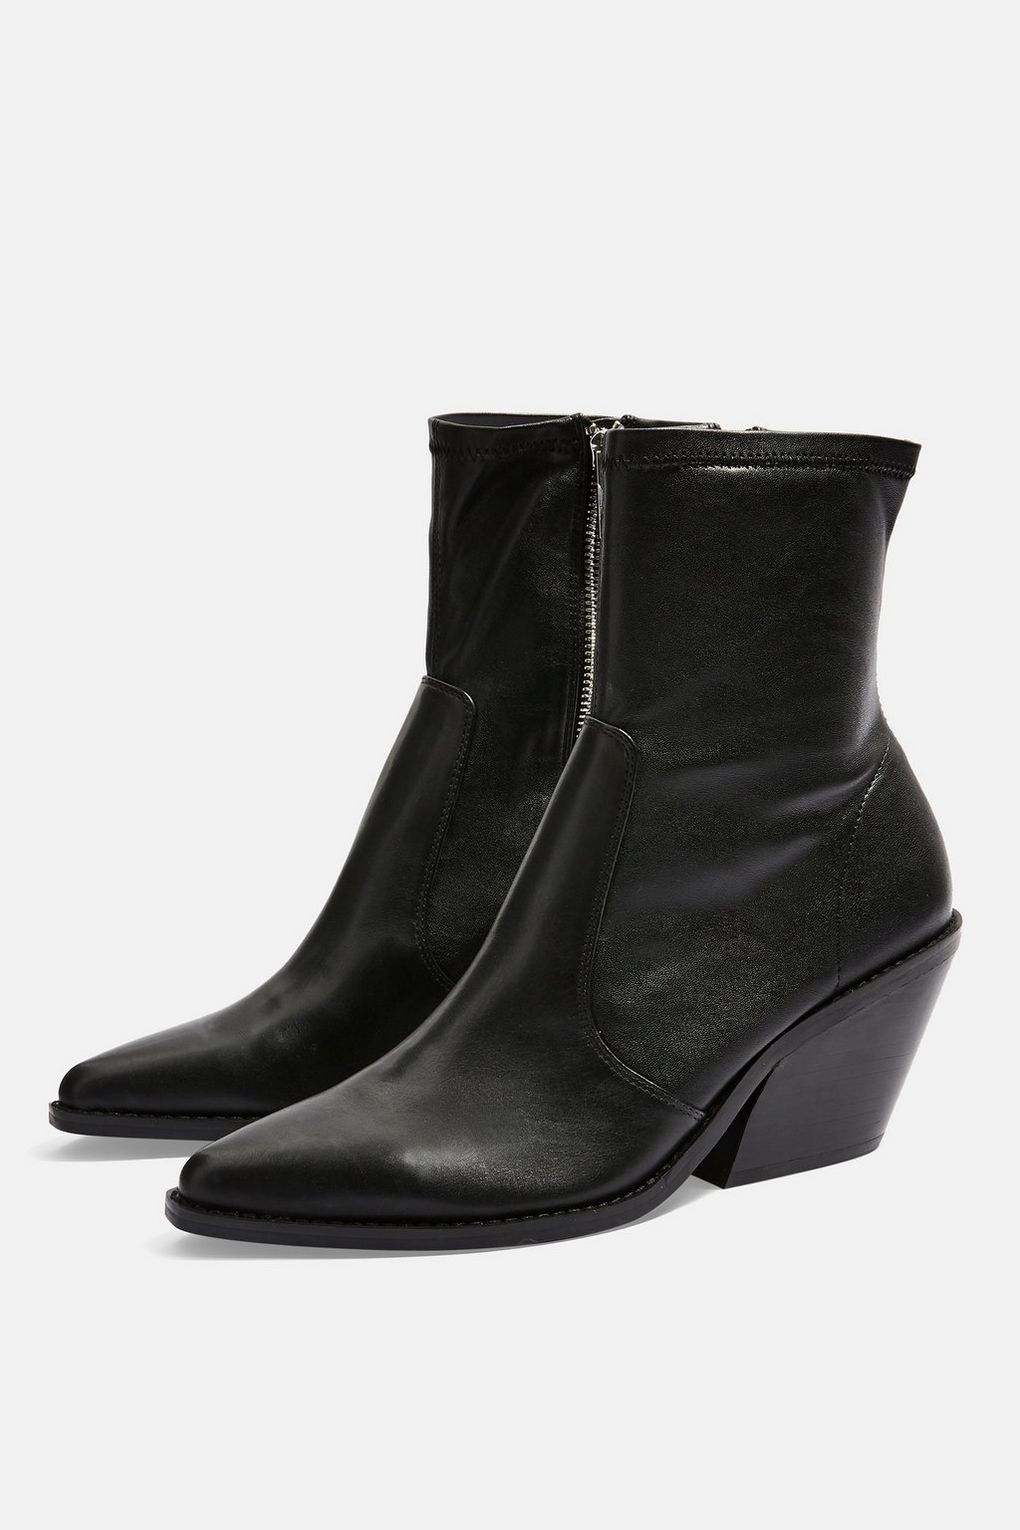 Topshop "Mission" Western Boot